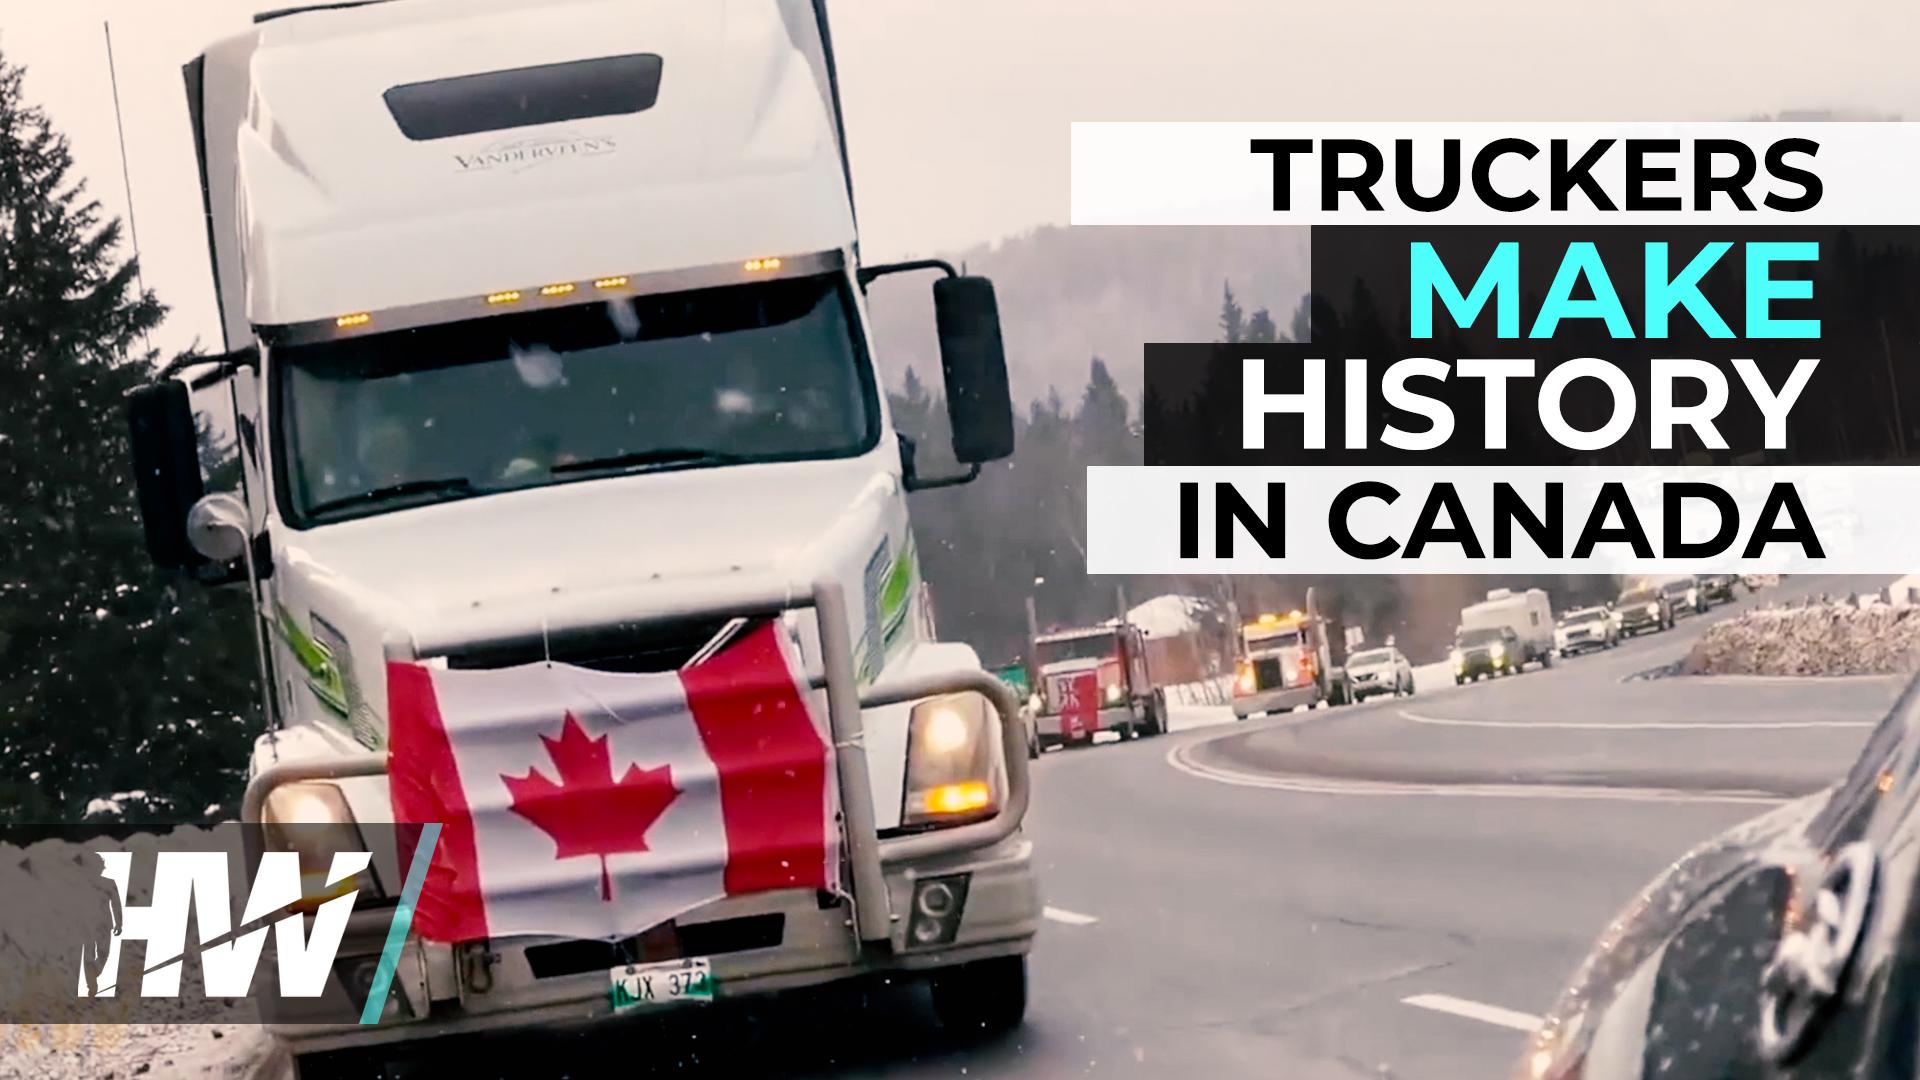 TRUCKERS MAKE HISTORY IN CANADA